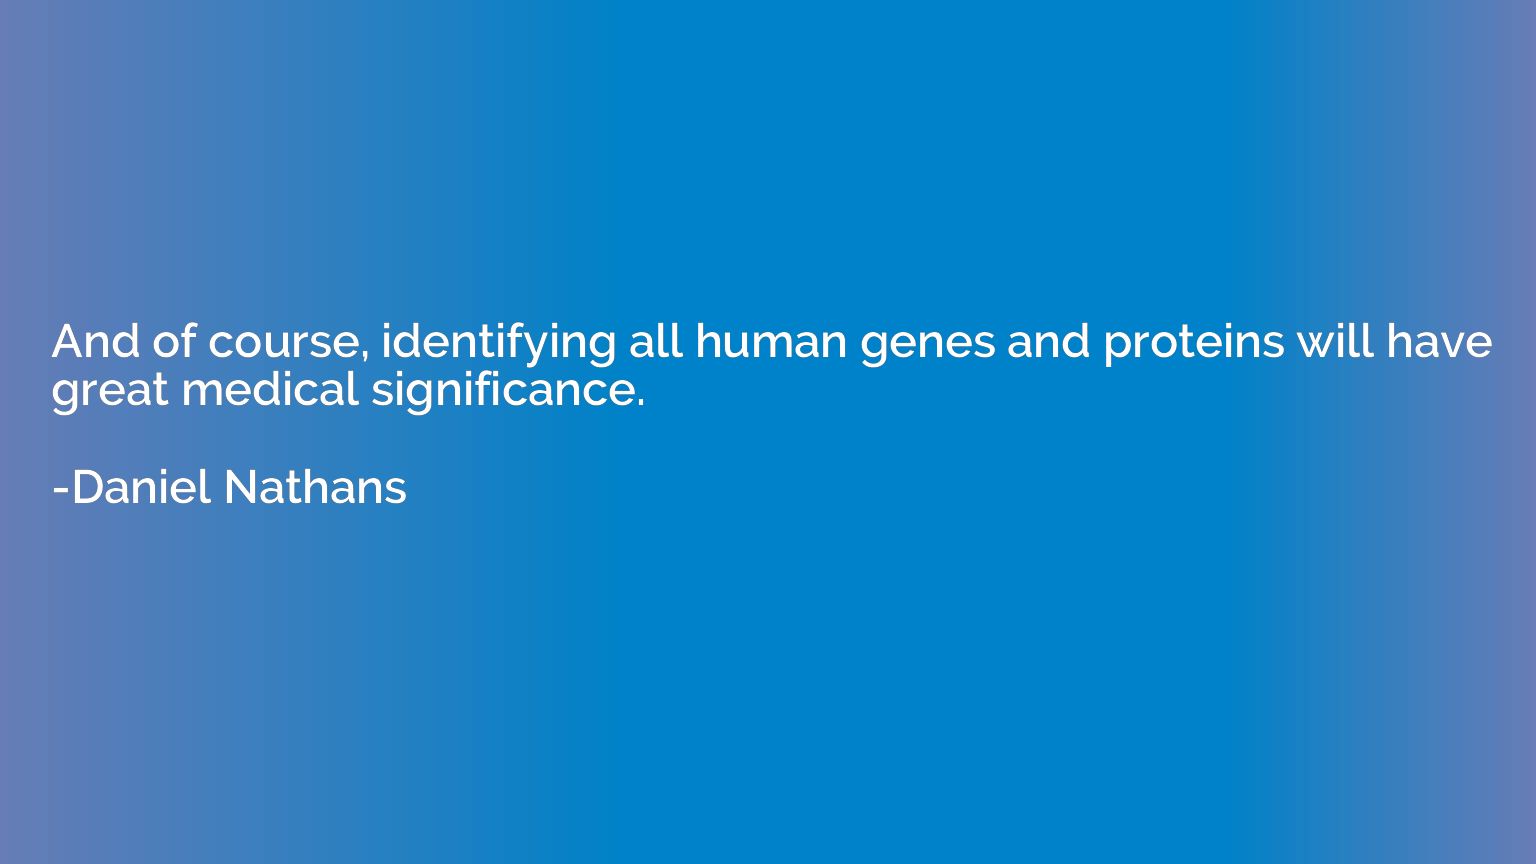 And of course, identifying all human genes and proteins will